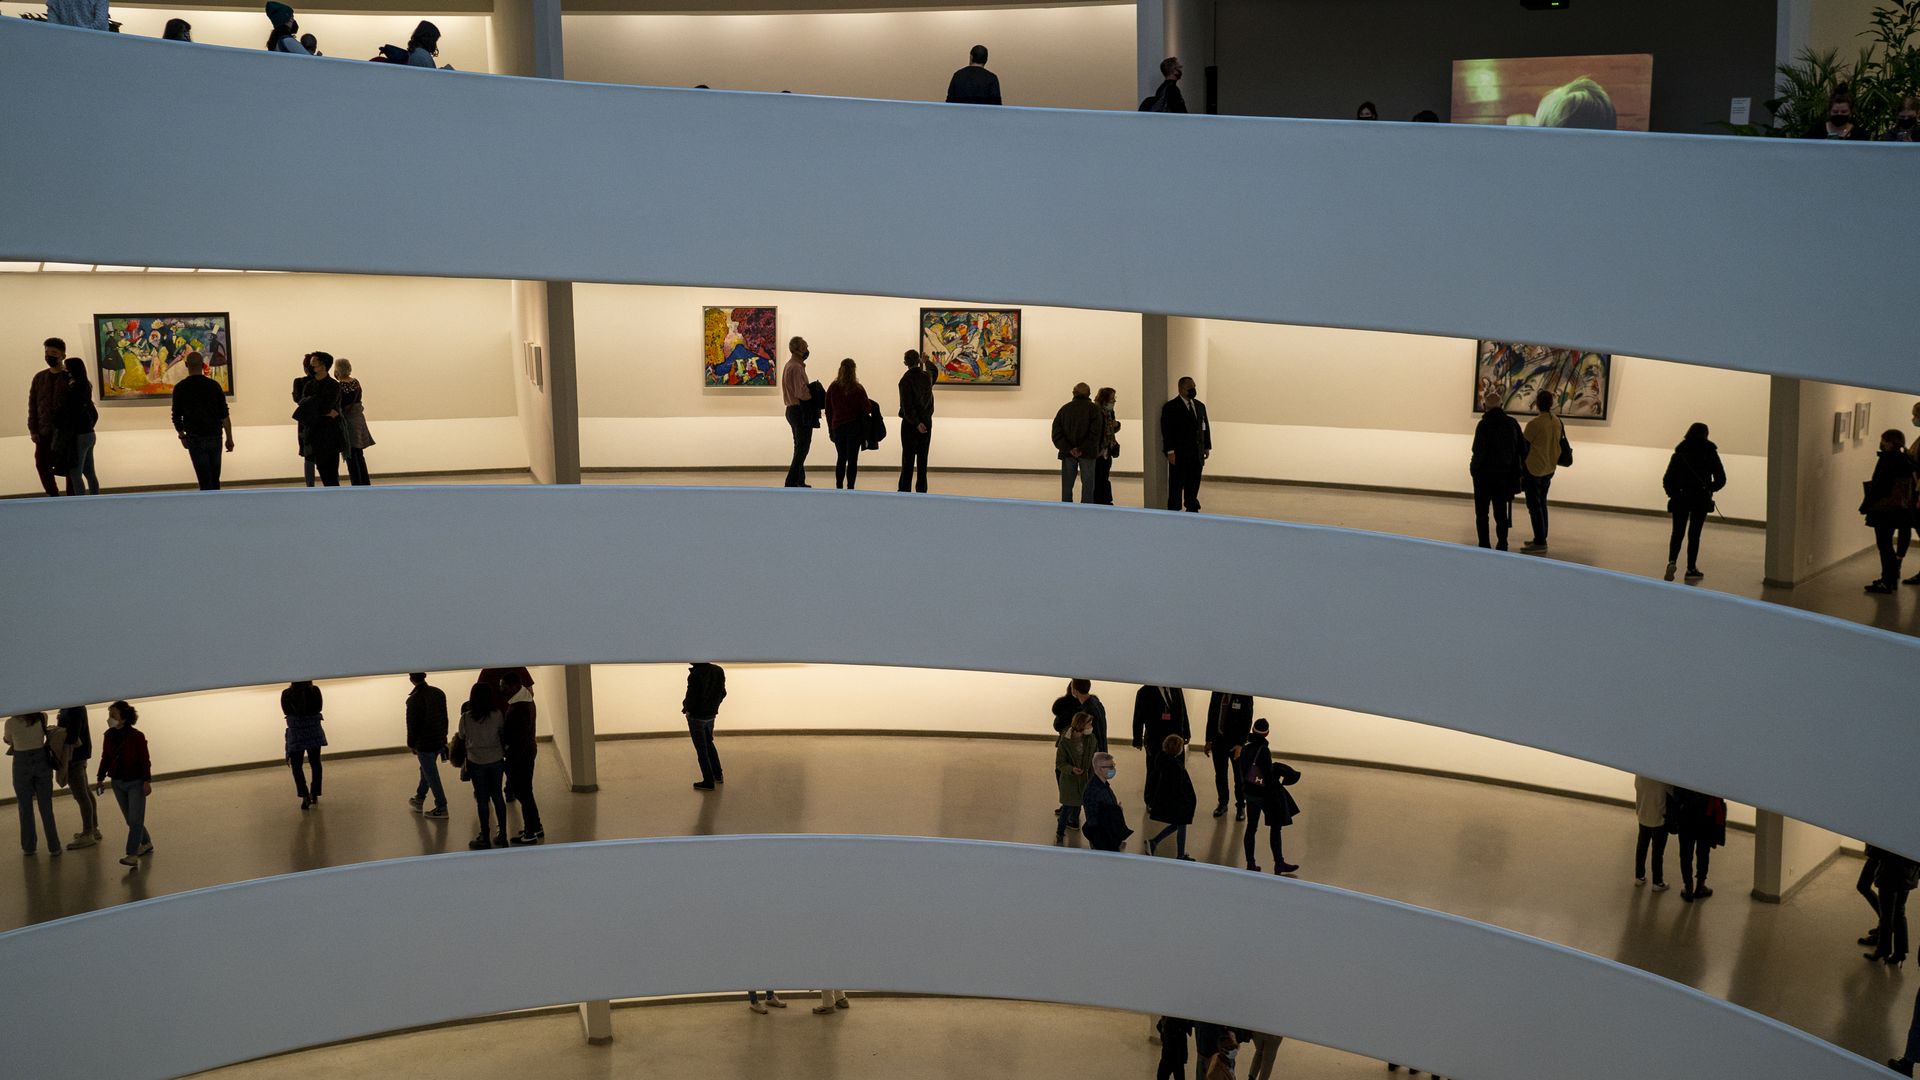 Photo of people milling about several floors of art galleries